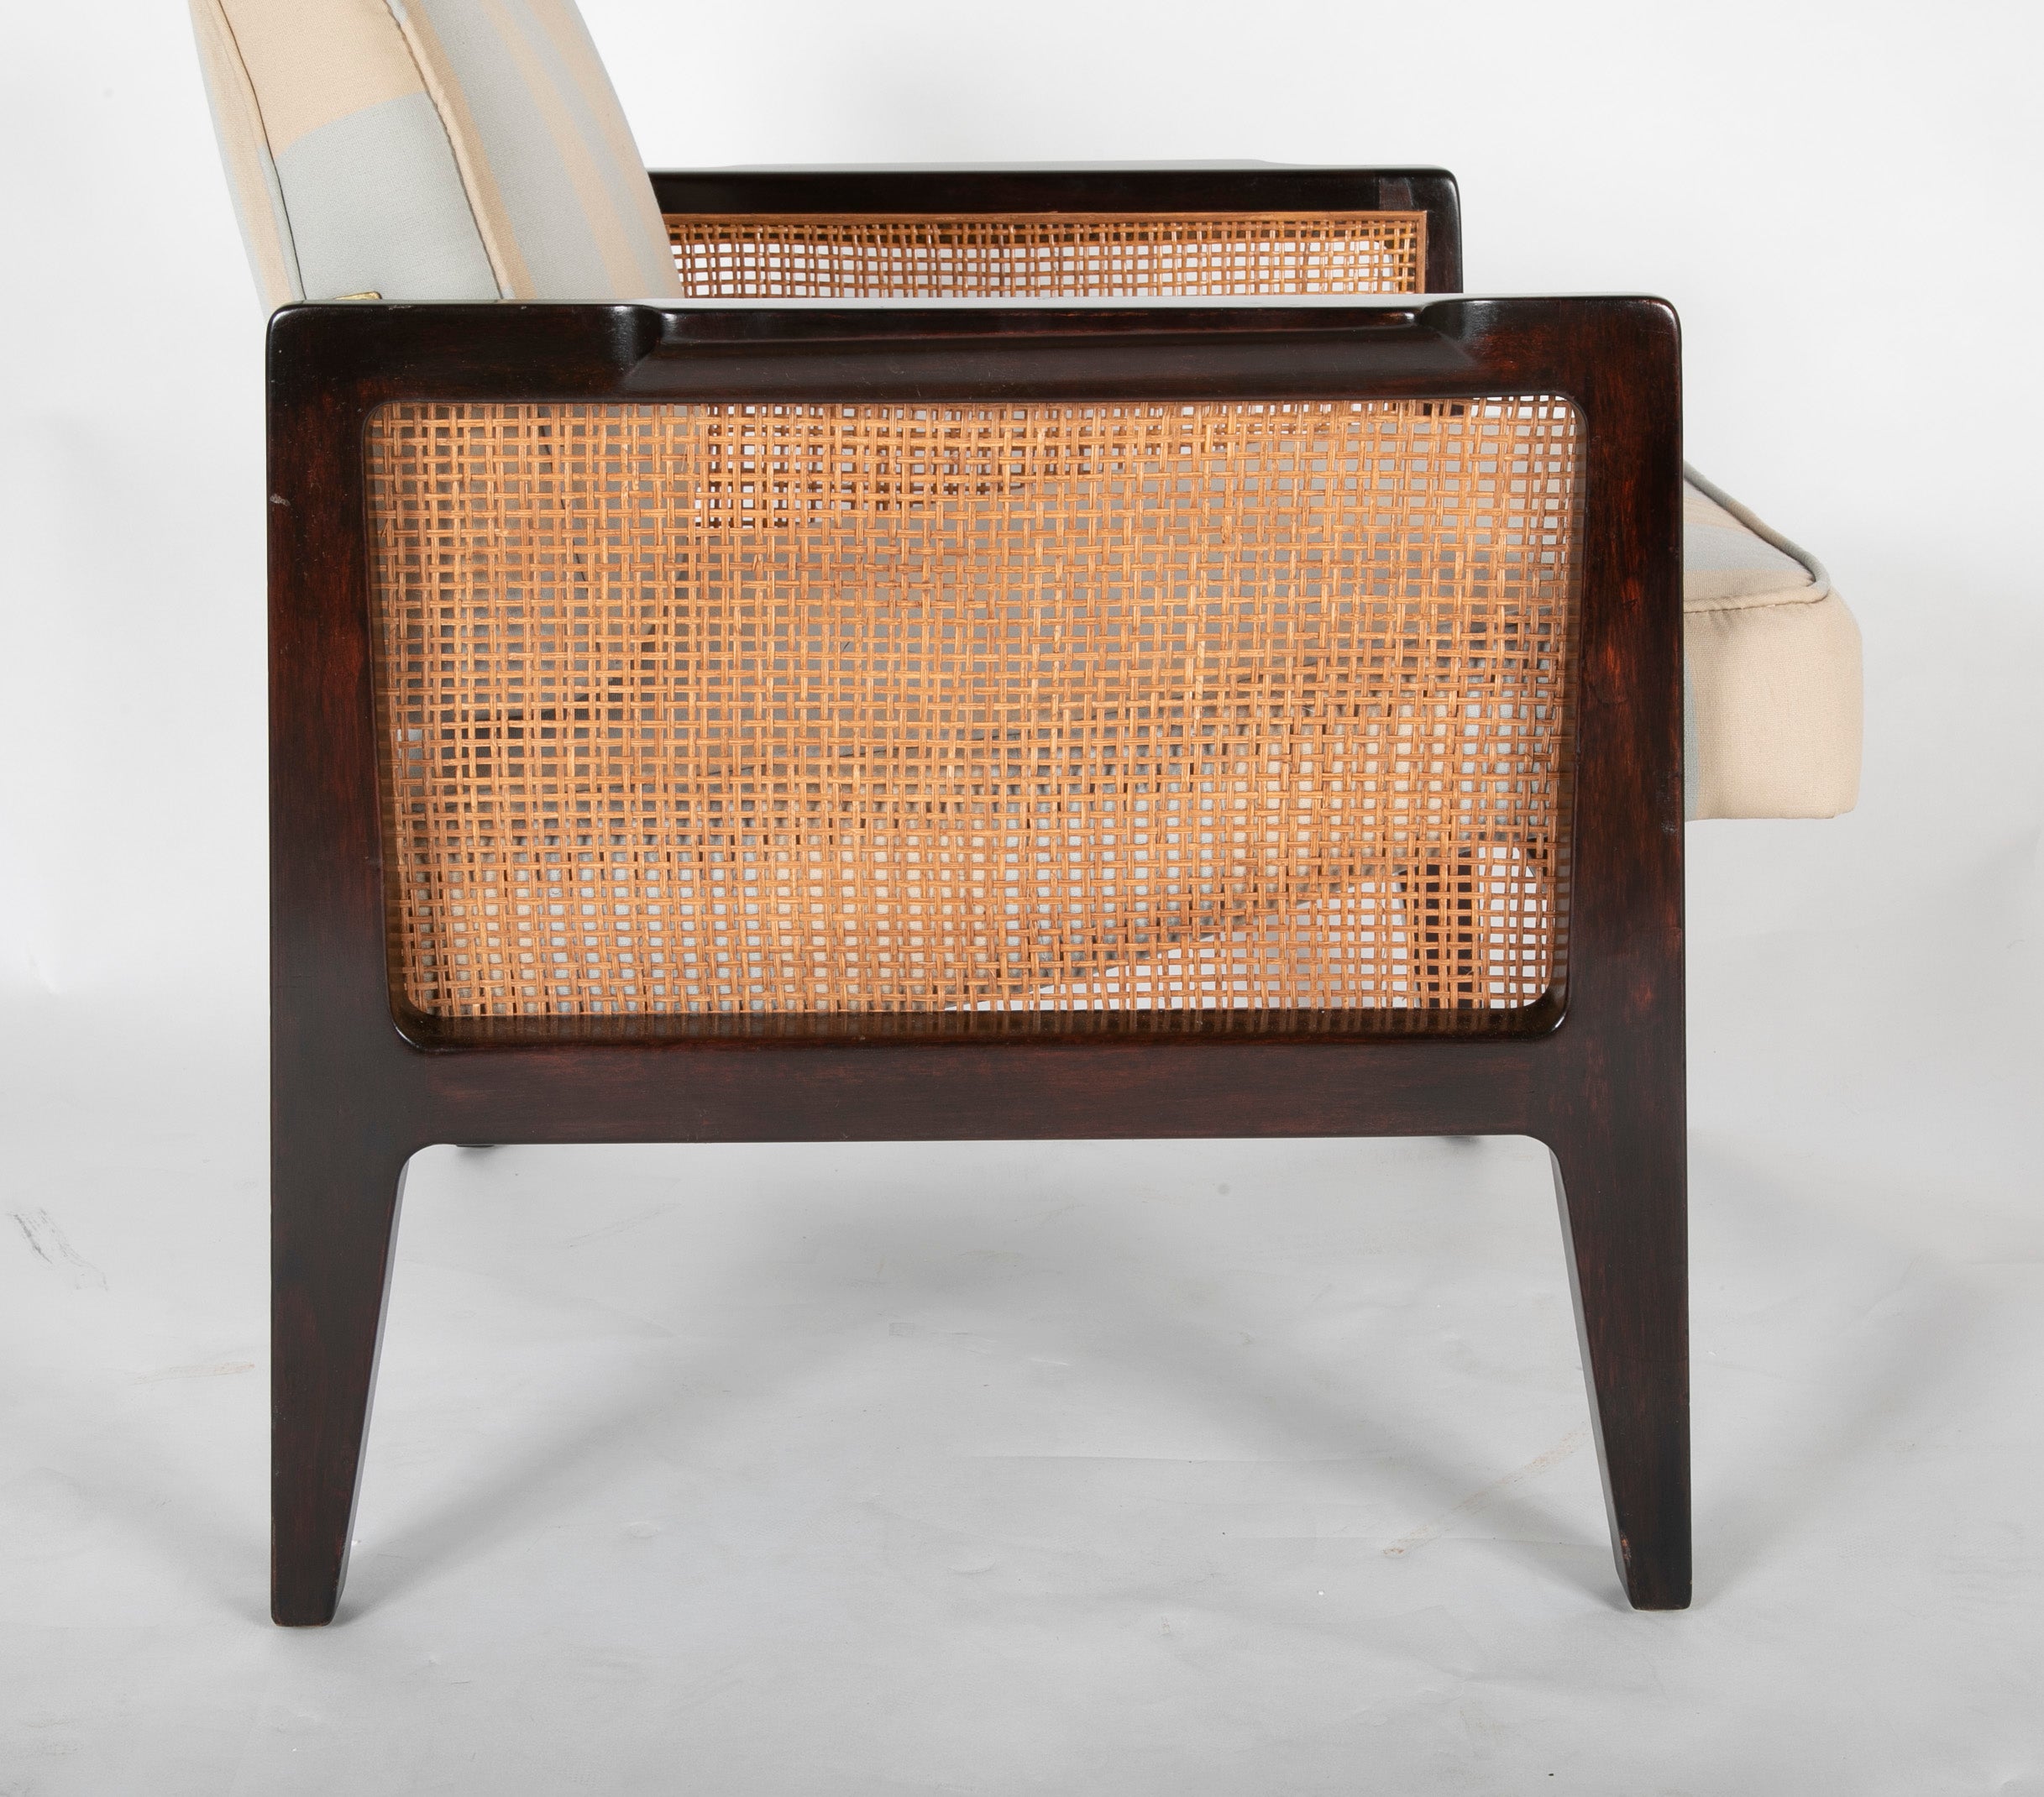 Caned and Ebonized Arm Chair Designed by Edward Wormley